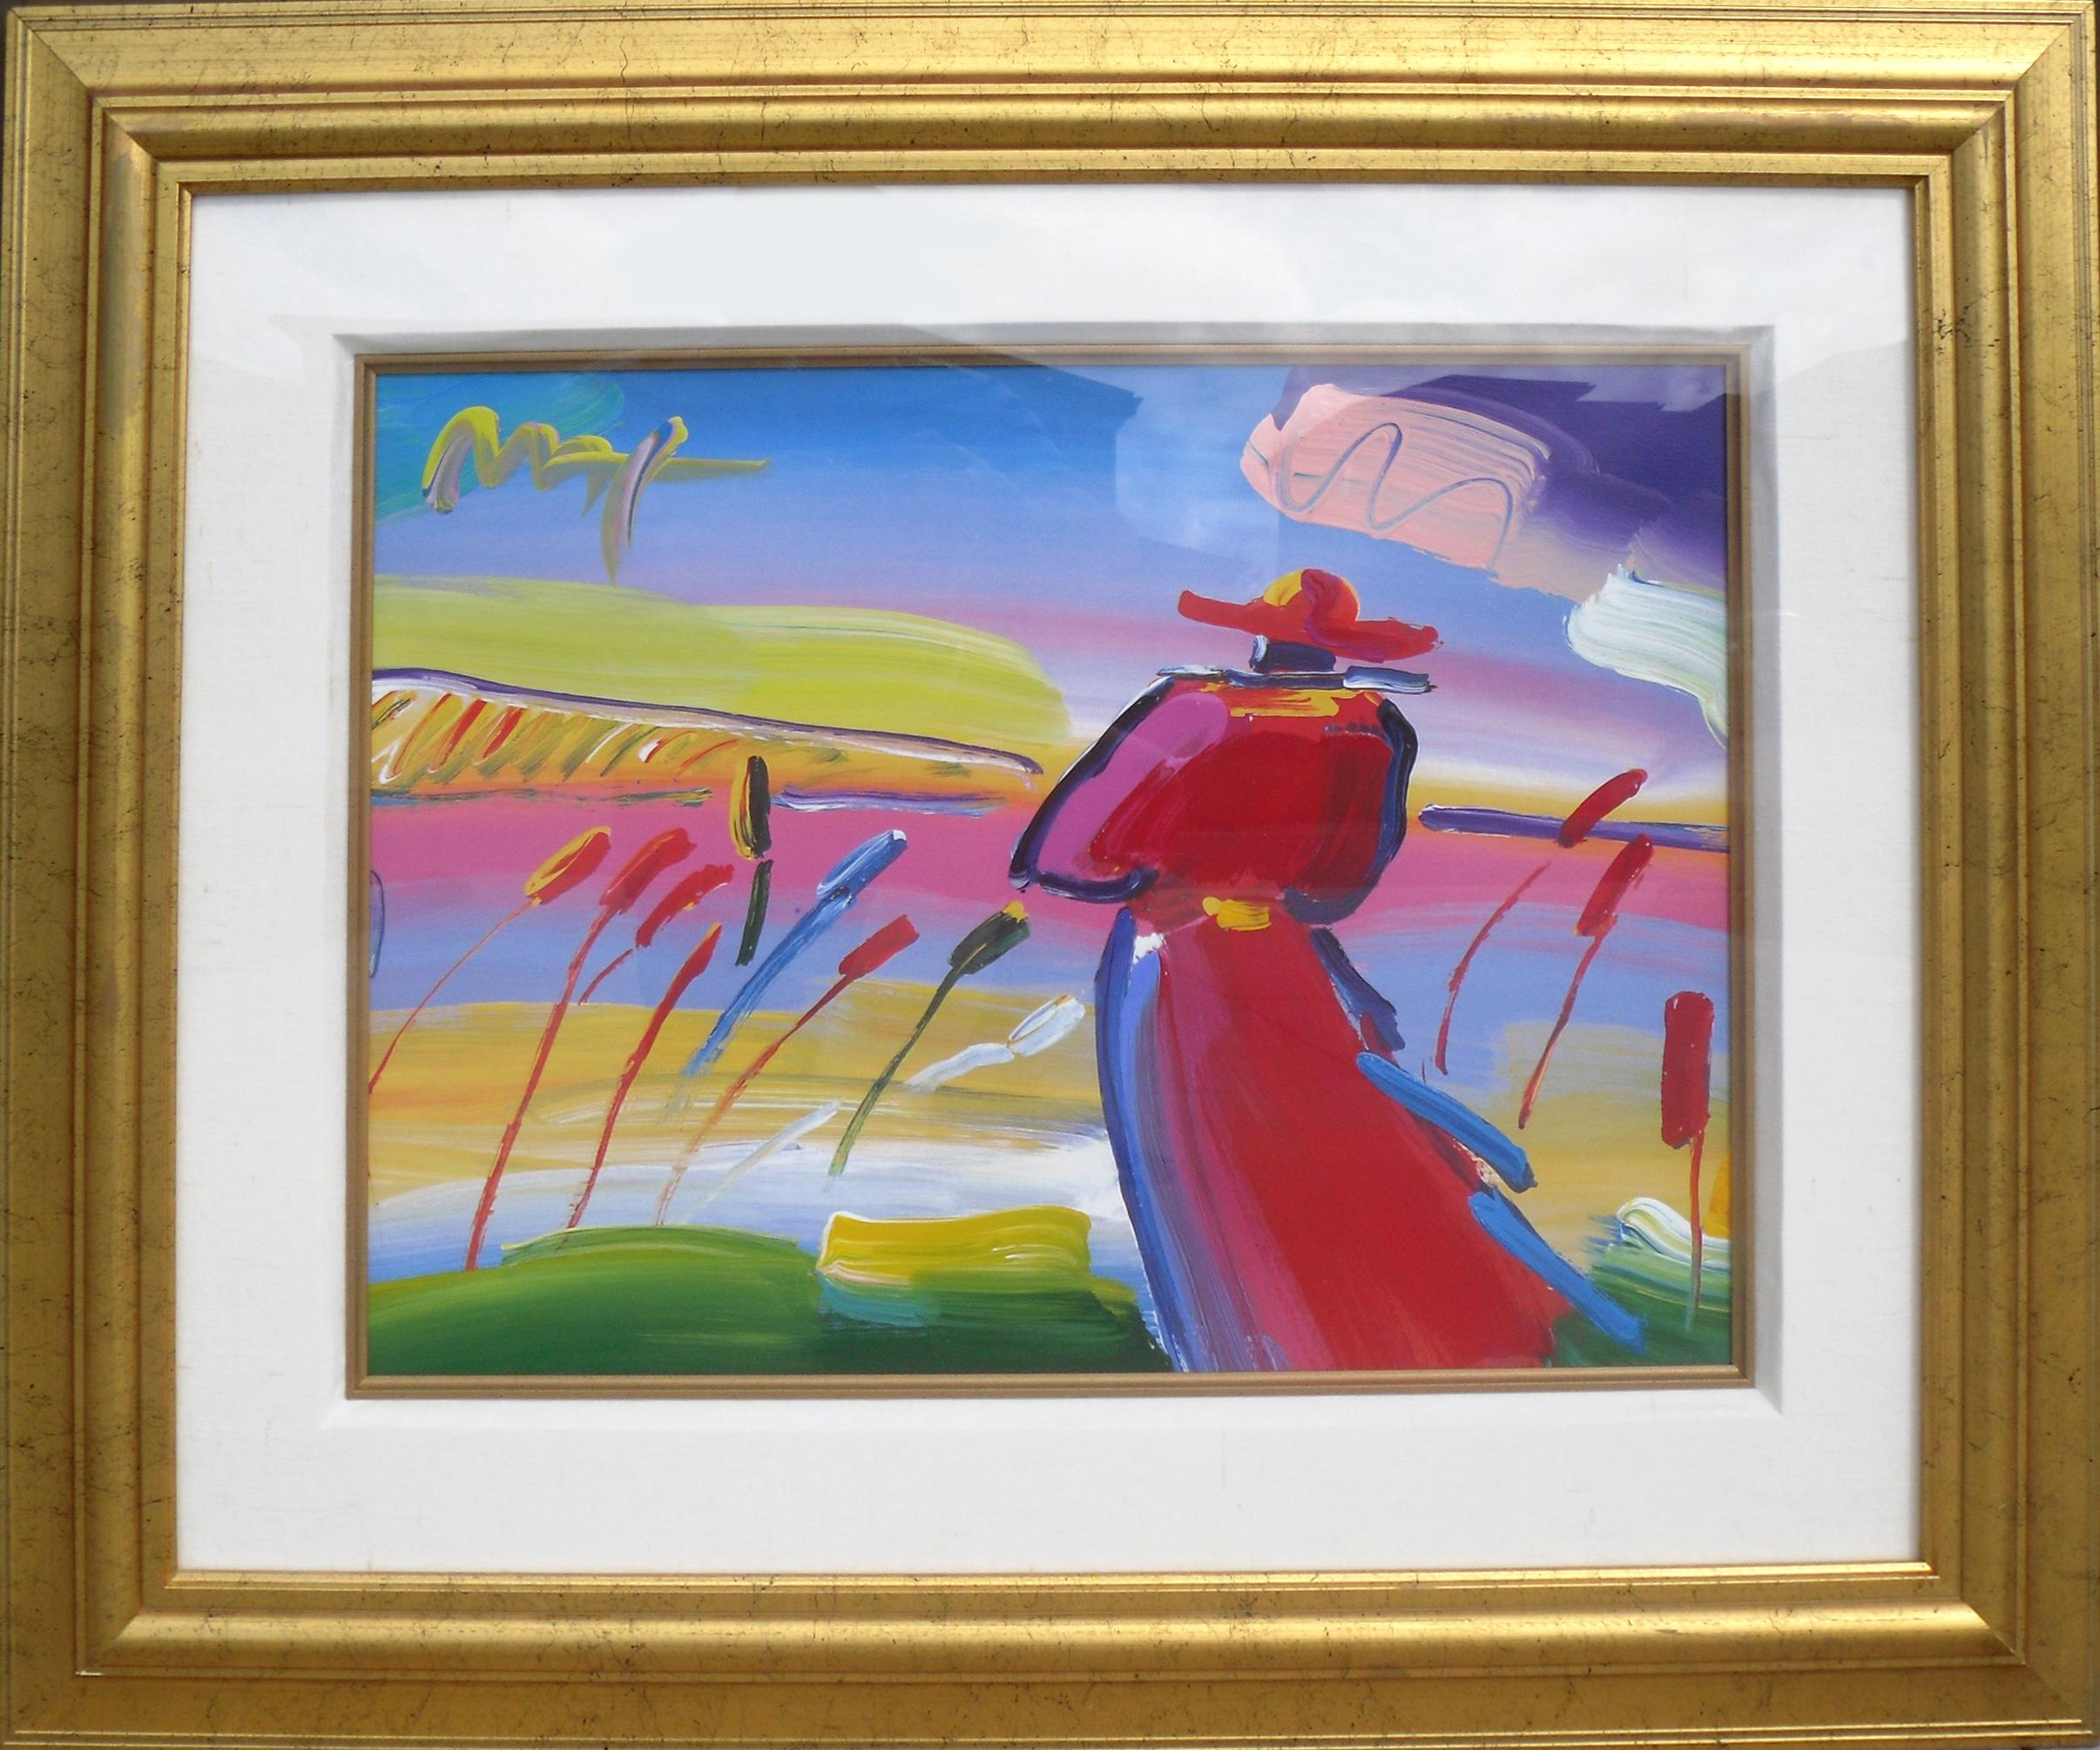 Walking in Reeds, Painting by Peter Max